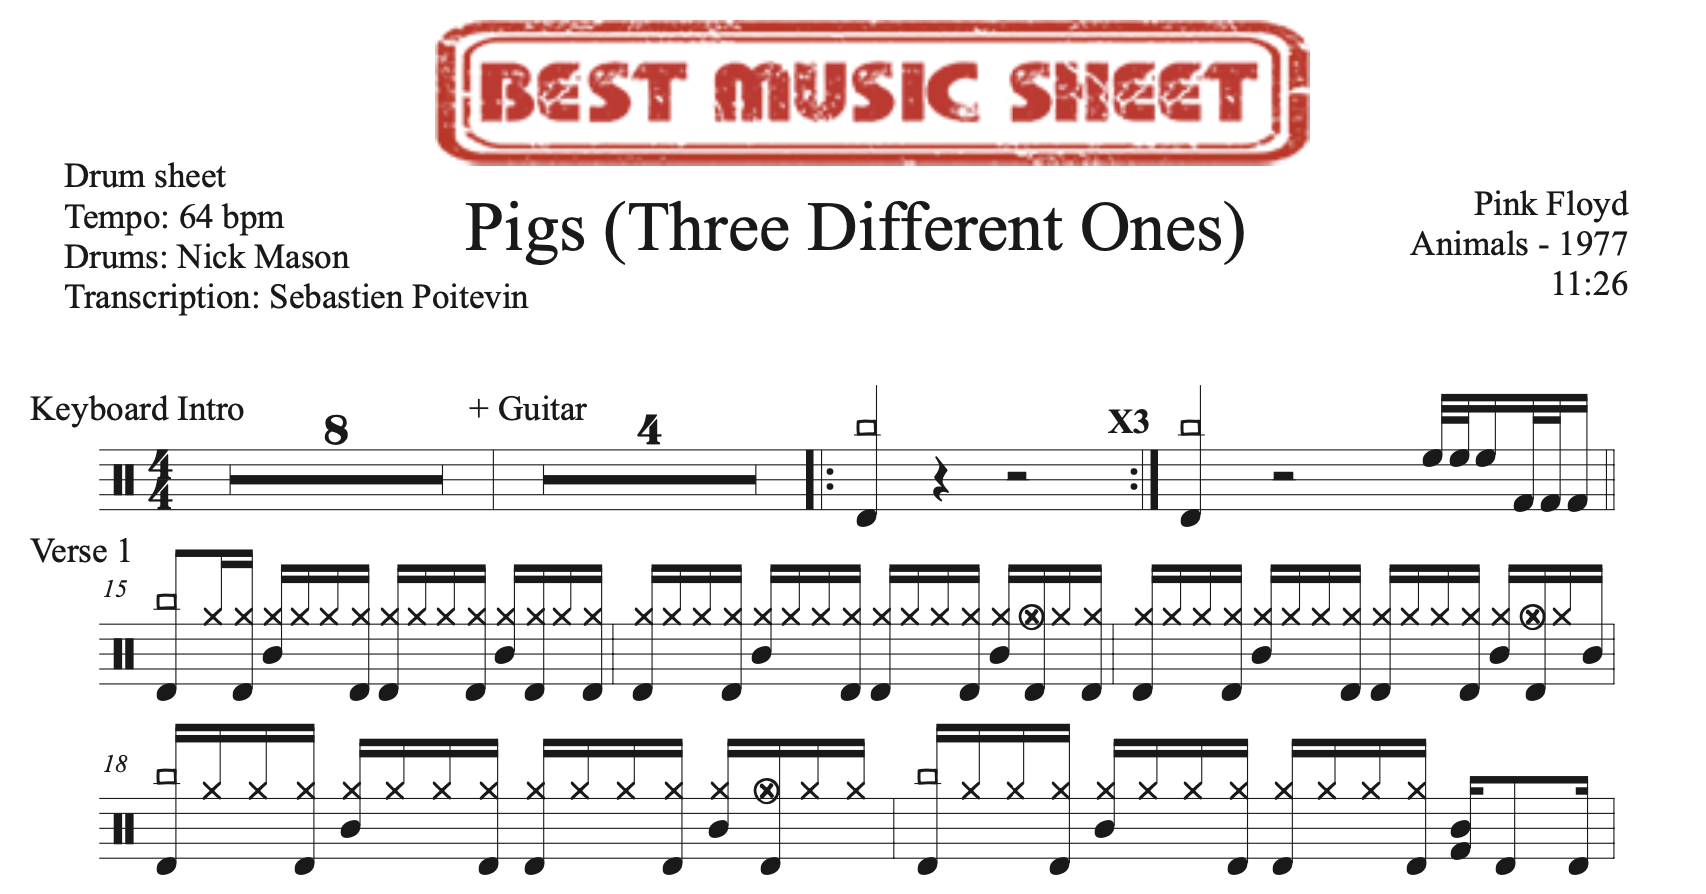 Sample drum sheet of Pigs (Three Different Ones)